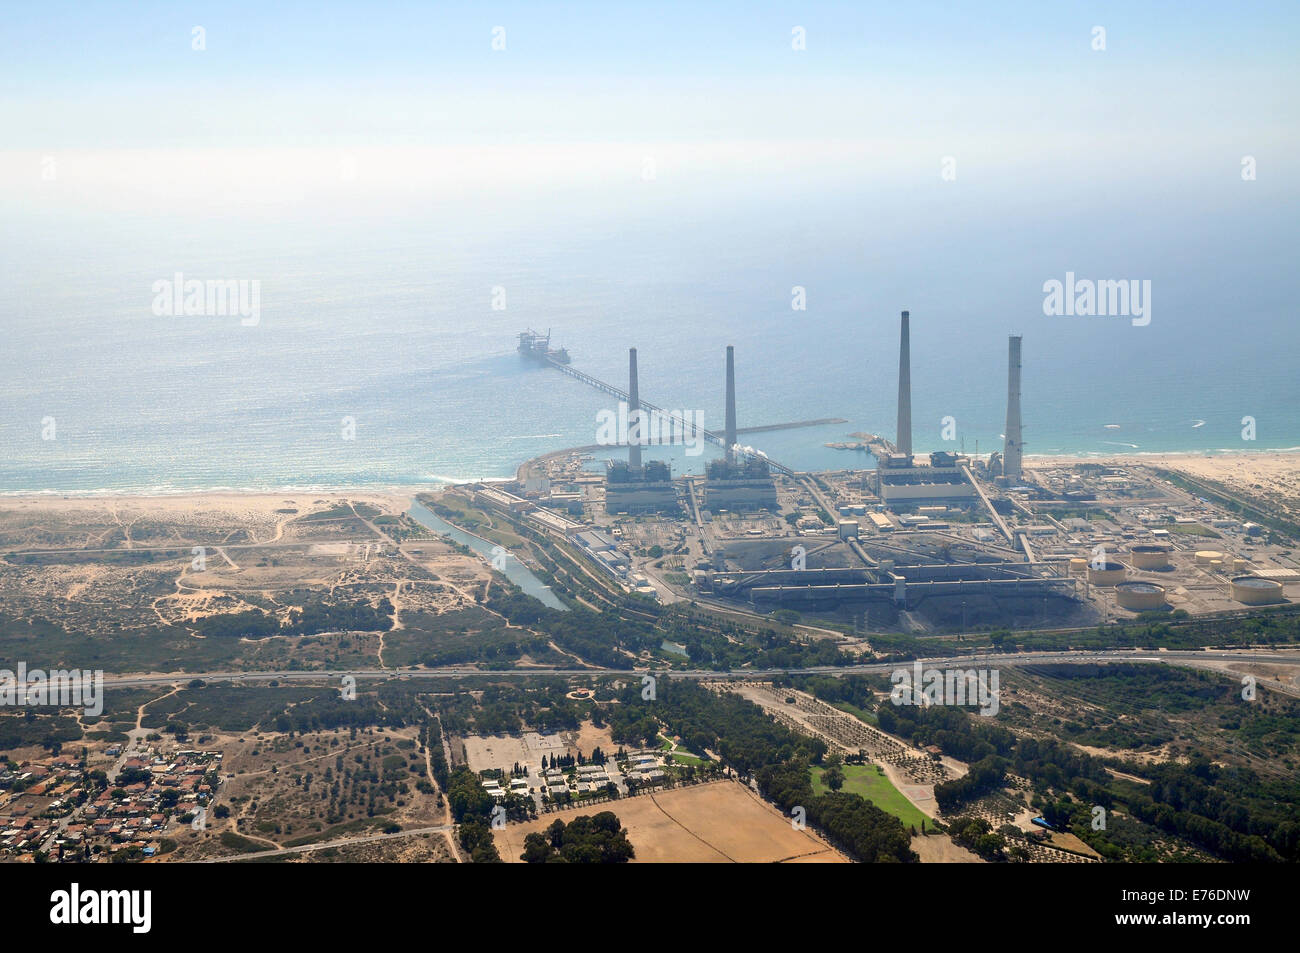 Aerial Photography of the Orot Rabin coal operated power plant, Hadera, Israel Stock Photo